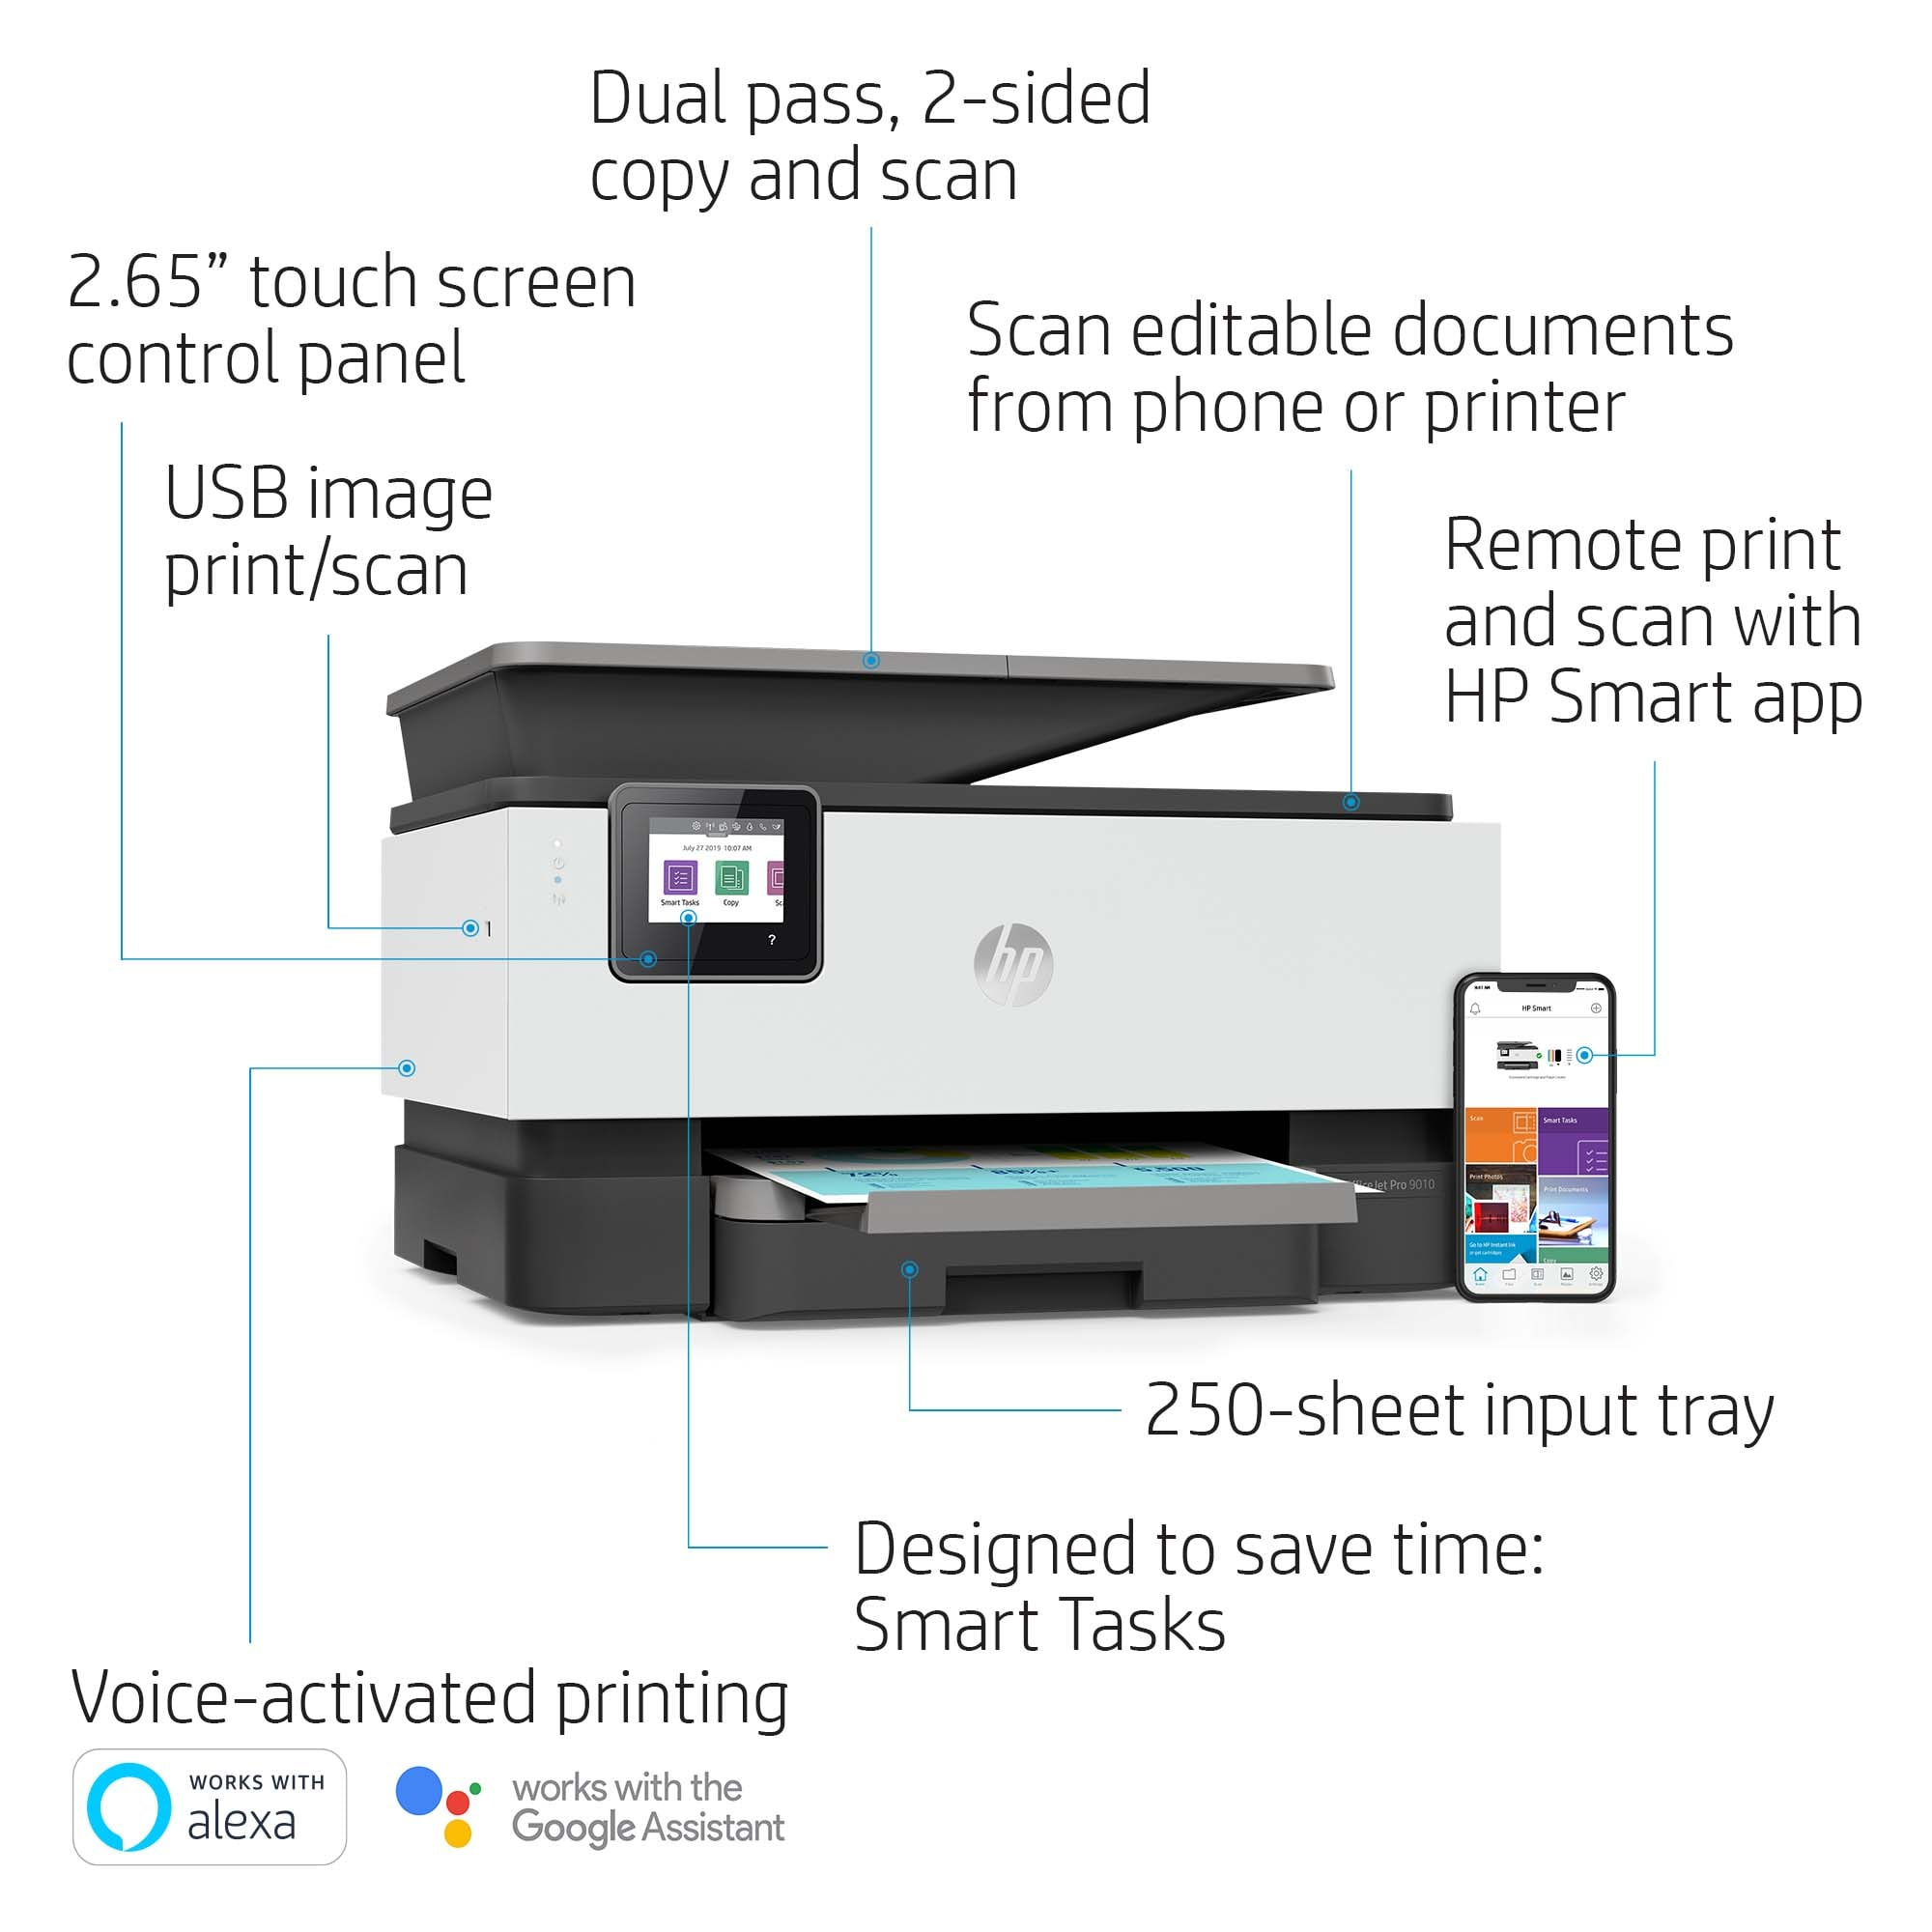 HP OfficeJet Pro 9010, 9020 printers - Control panel features